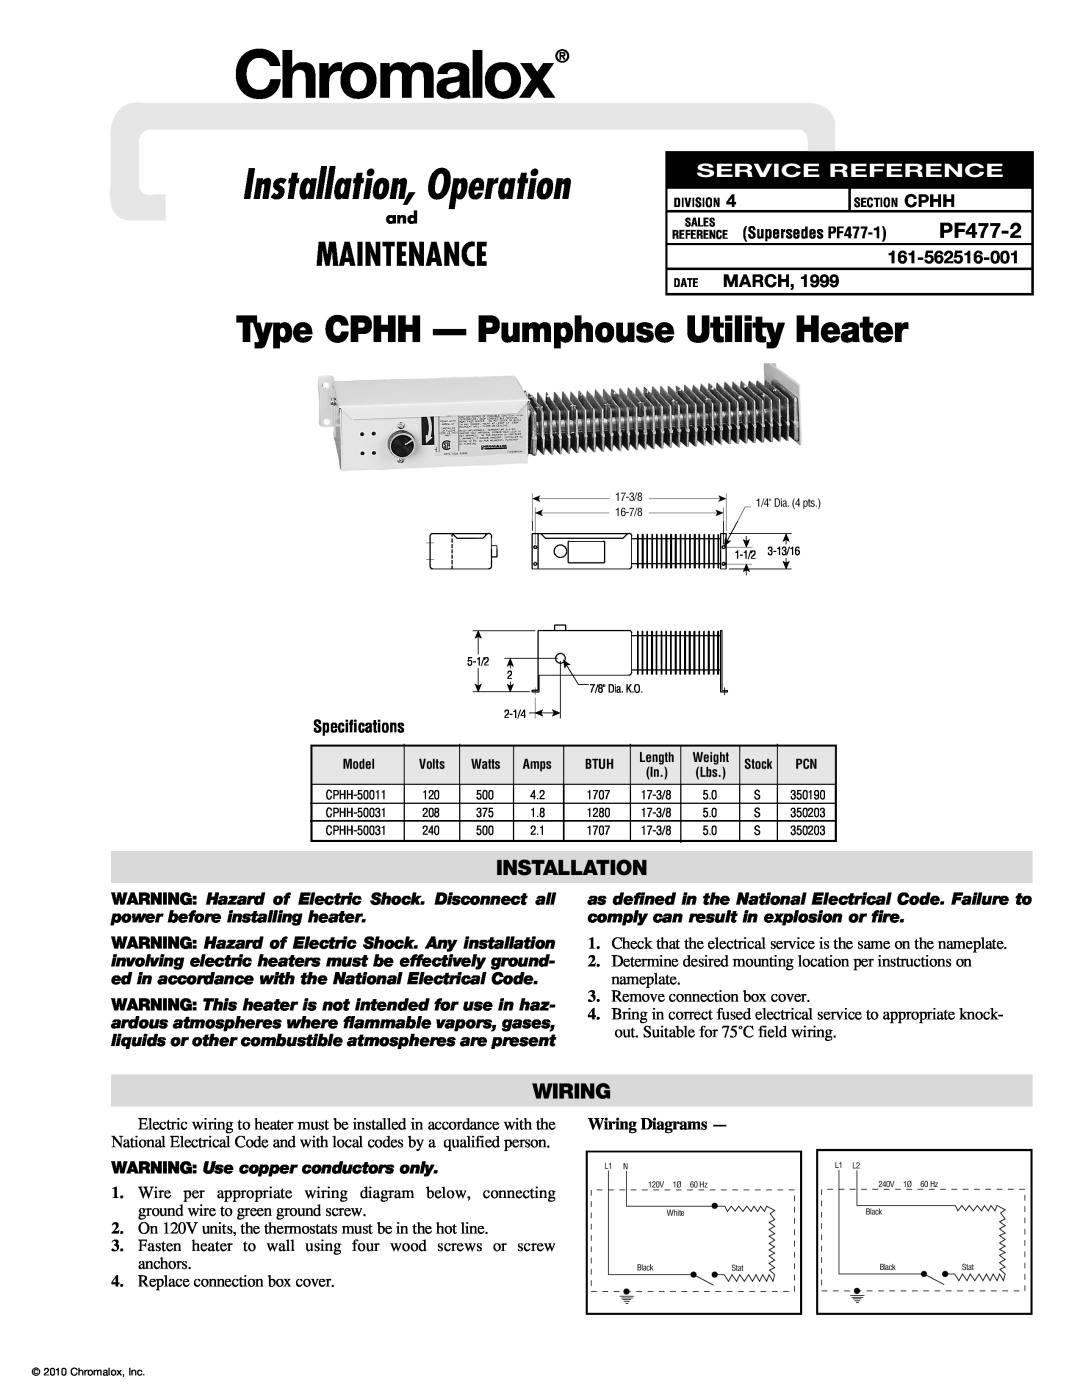 Chromalox PF477-2 specifications Wiring, Specifications, Chromalox, Installation, Operation, Maintenance, Date March 